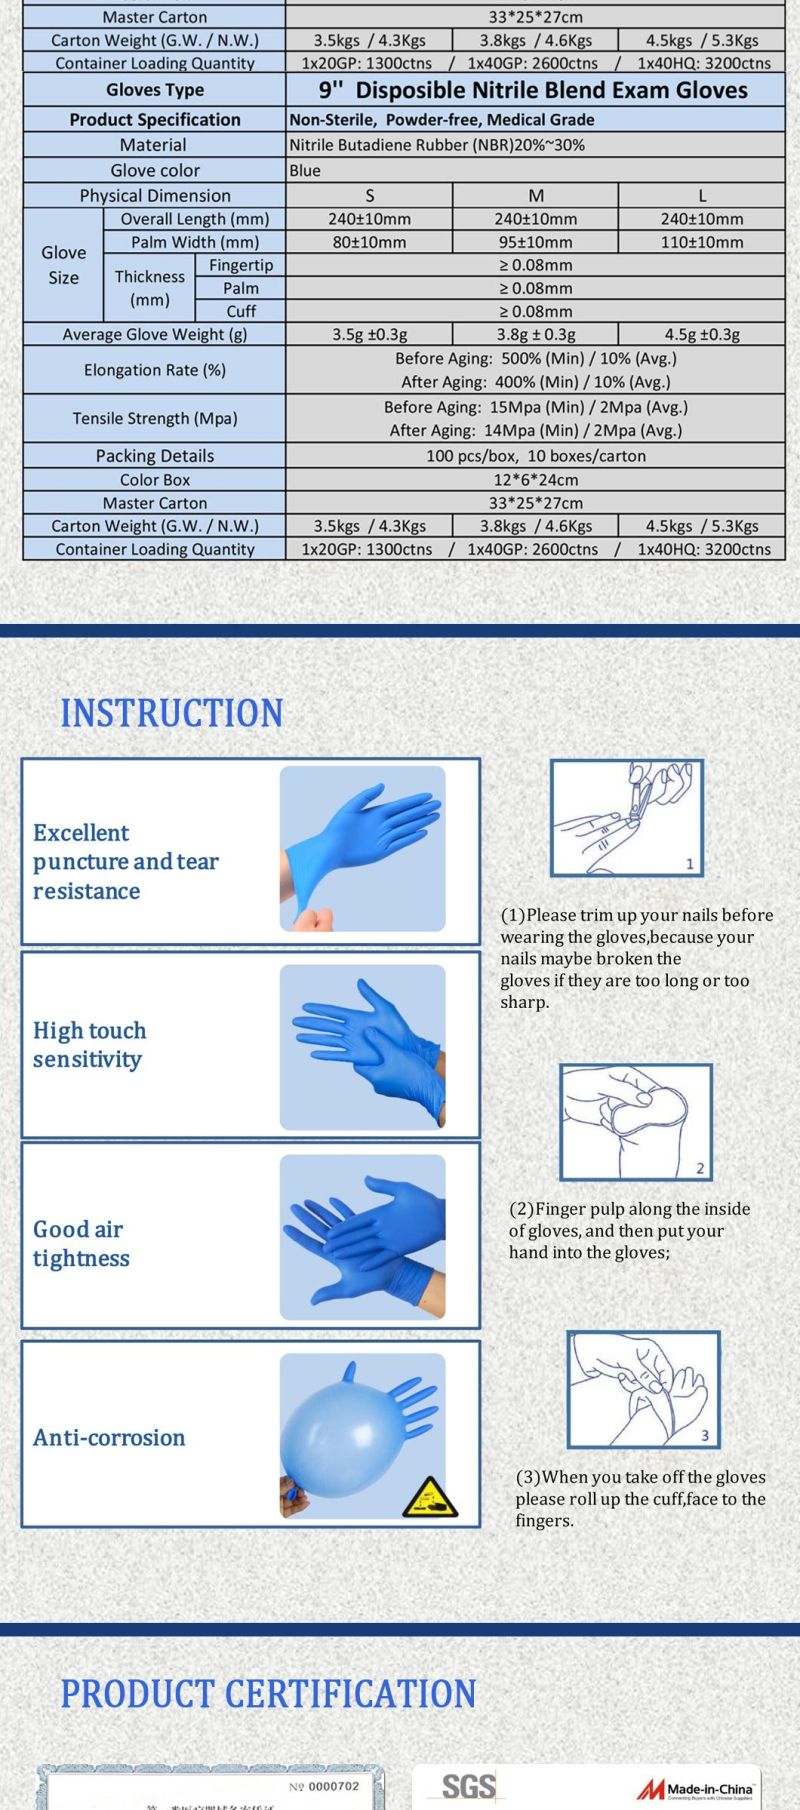 Disposable Examination Nitrile Gloves 100% L/C Sign with Factory